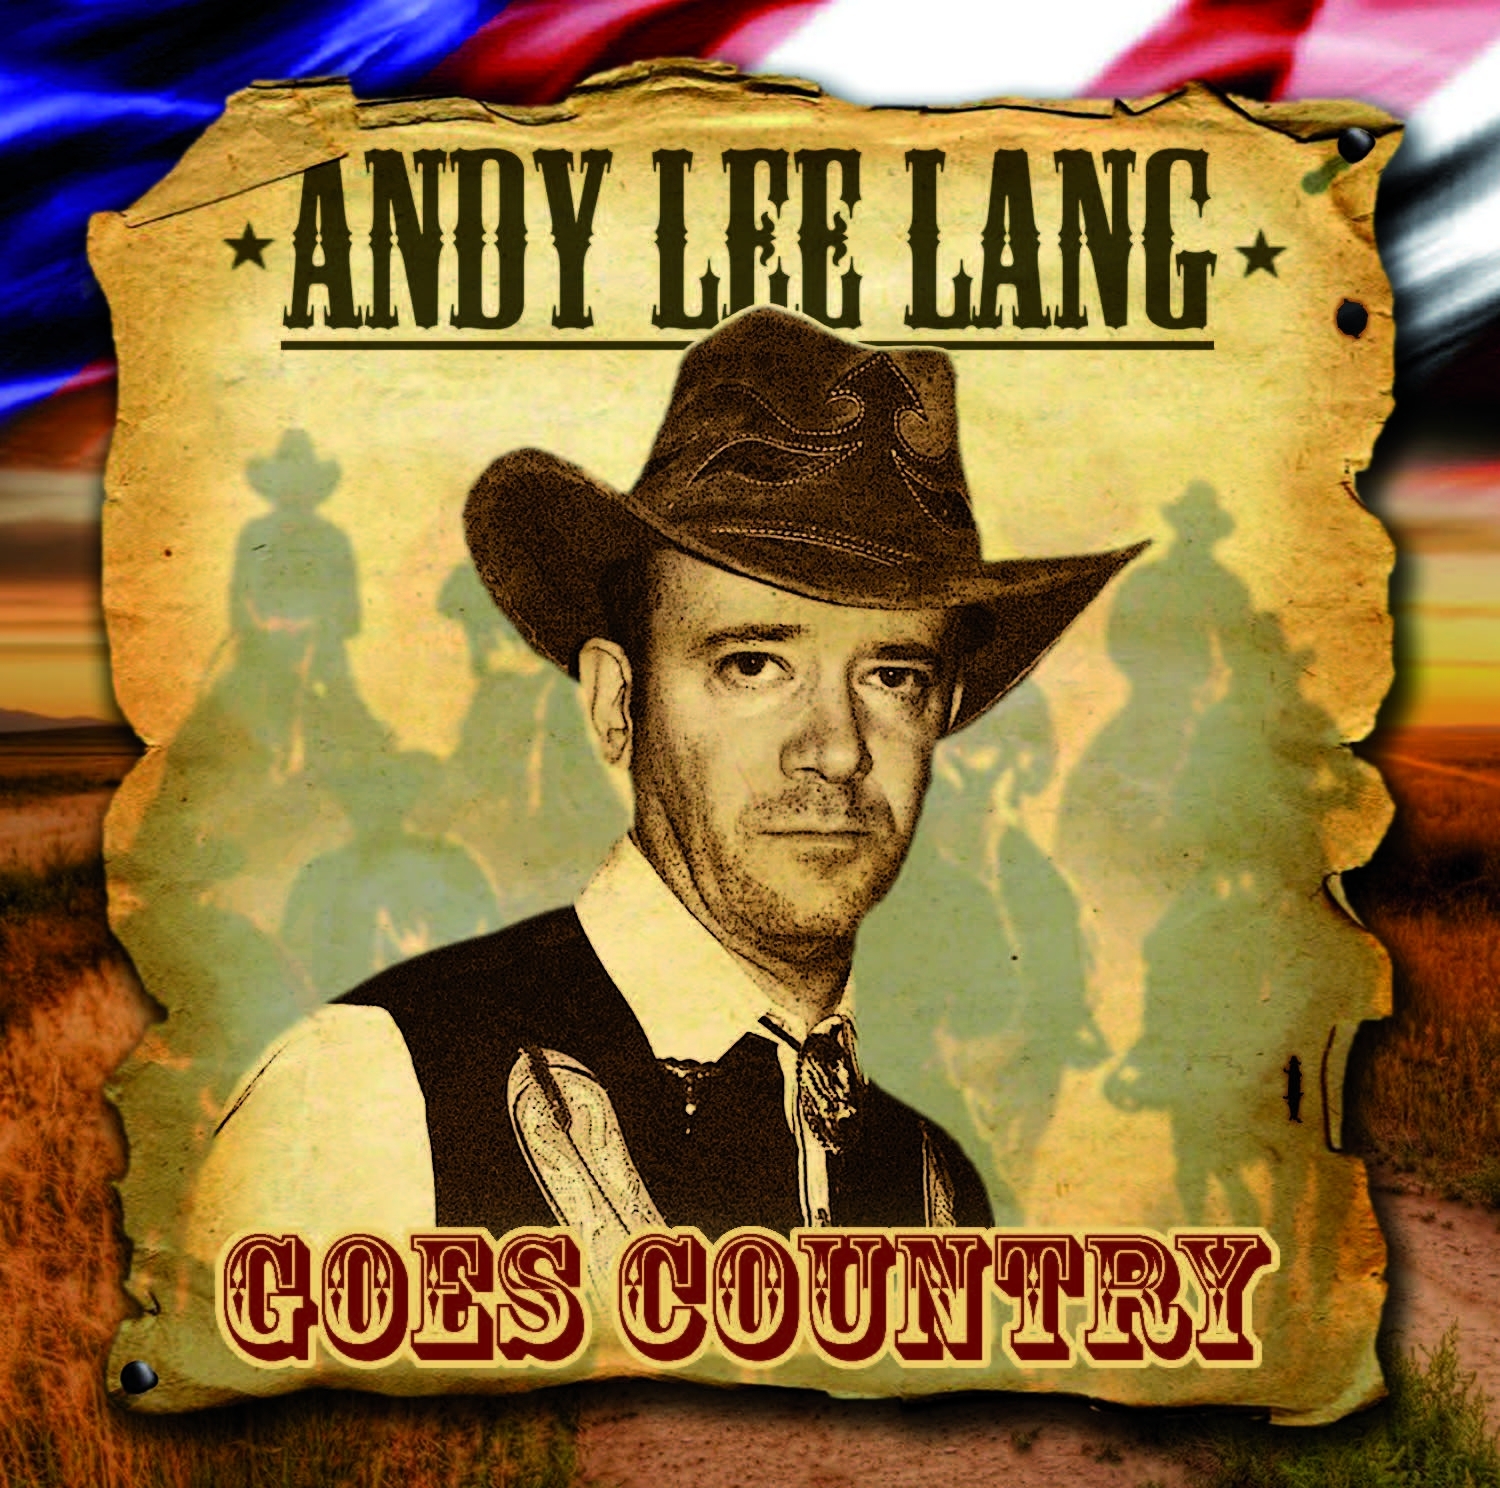 Andy Lee Lang goes Country © Archiv Theater Akzent